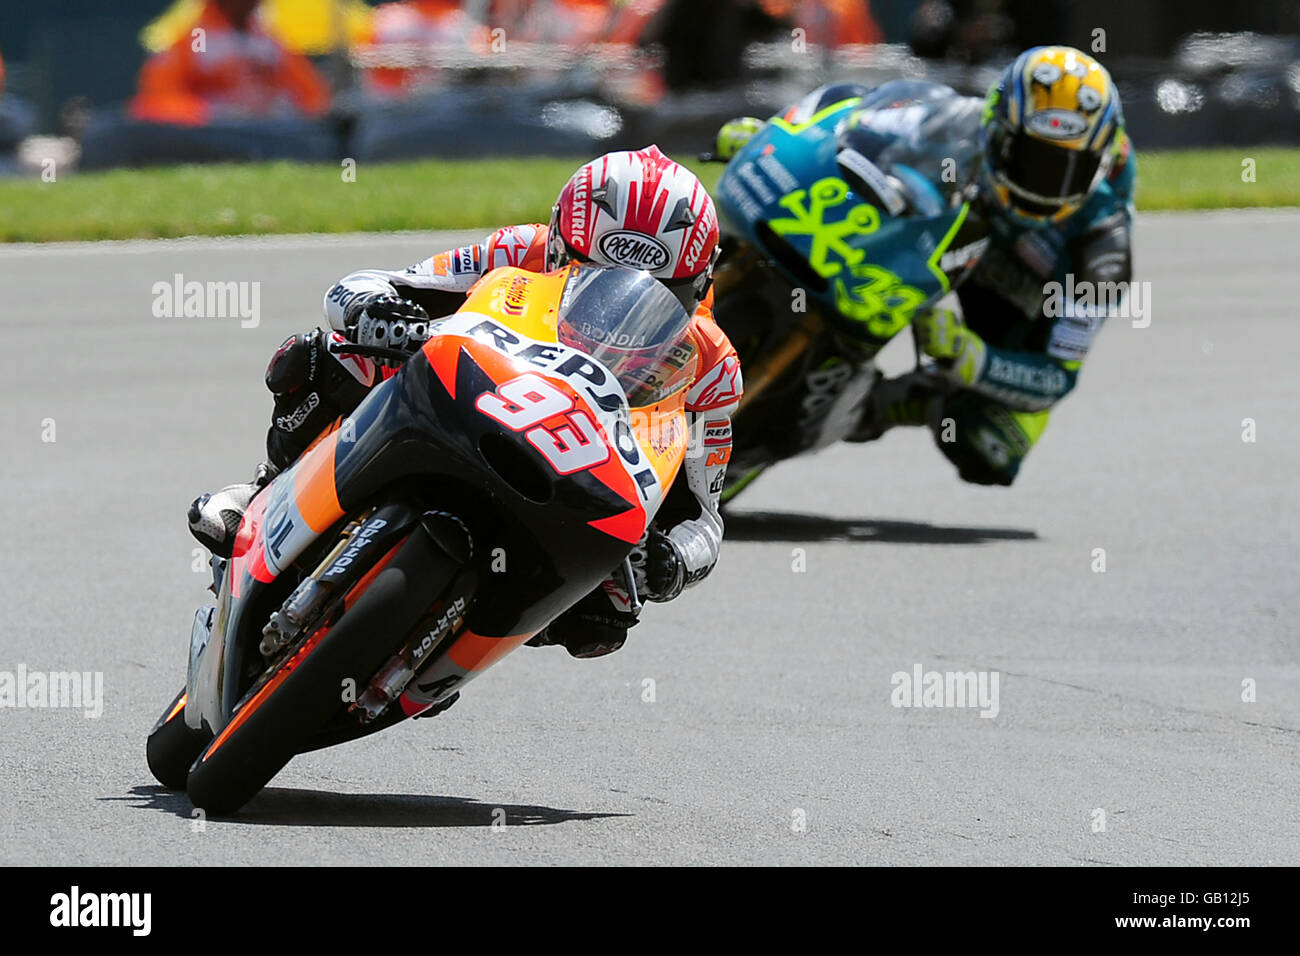 Repsol KTM's Marc Marquez (left) on his KTM 125 FRR during the 125cc Race during the bwin.com British Motorcycle Grand Prix at Donington Park. Stock Photo